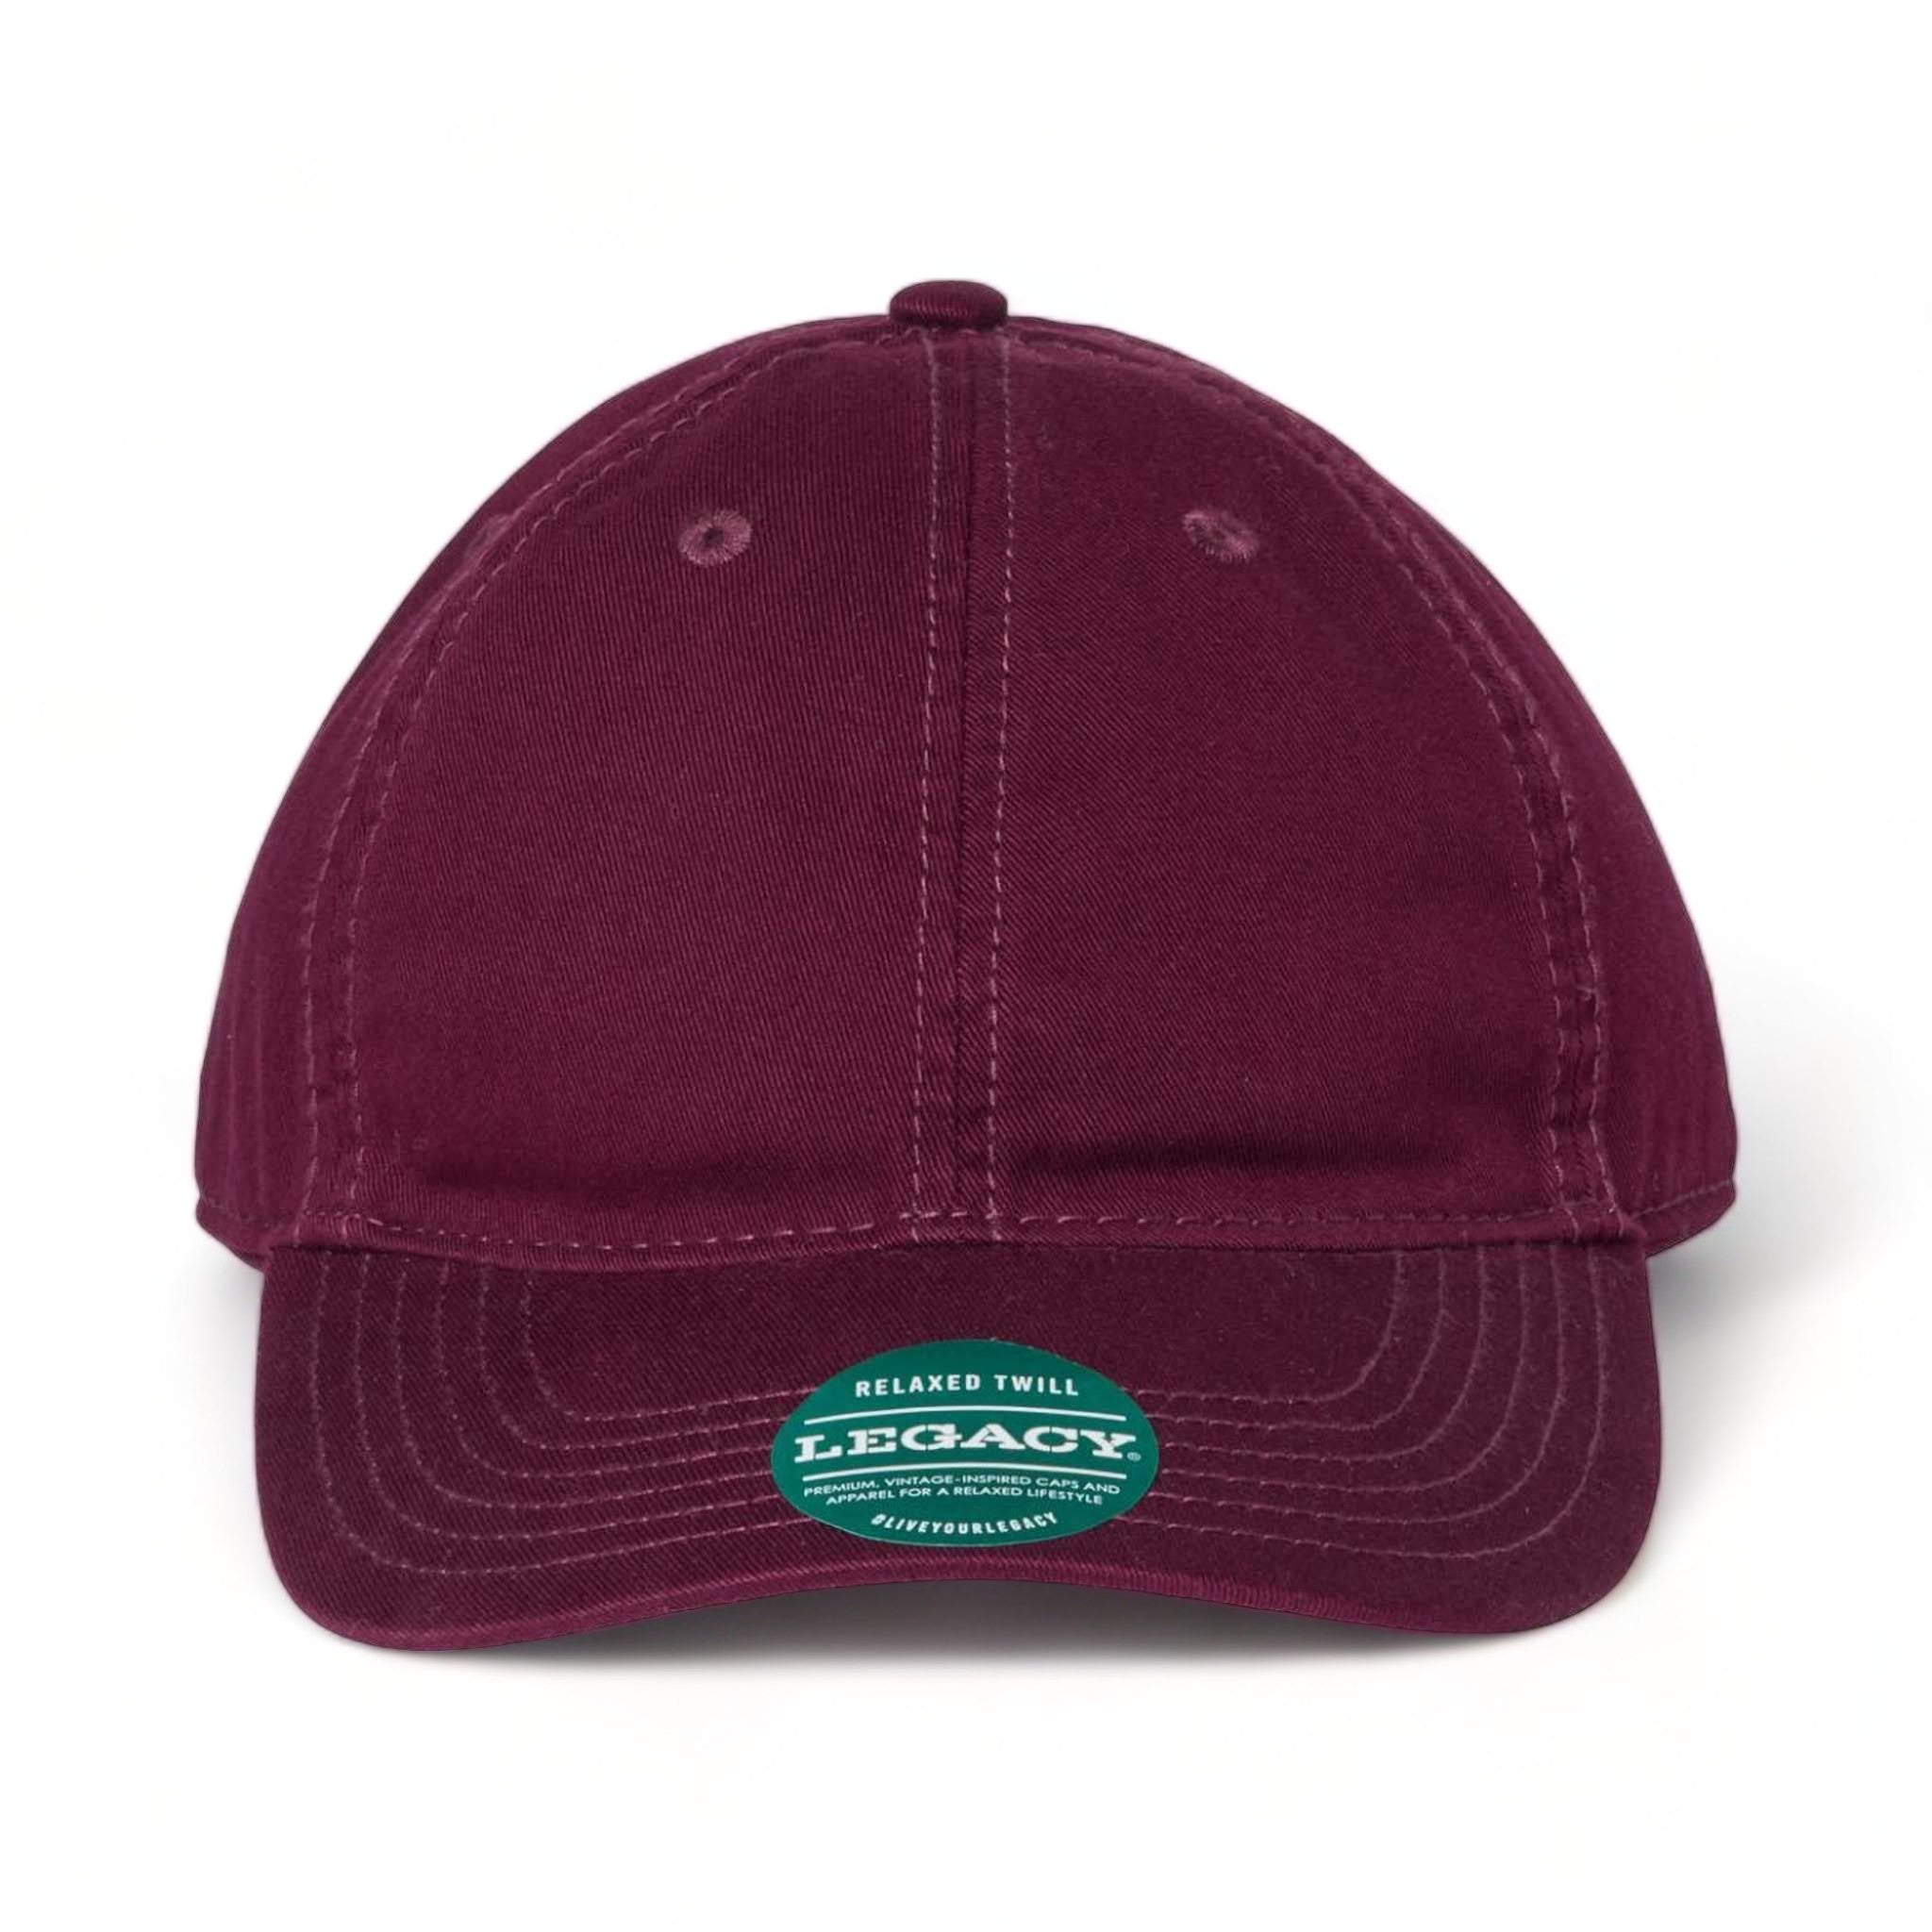 Front view of LEGACY EZA custom hat in maroon